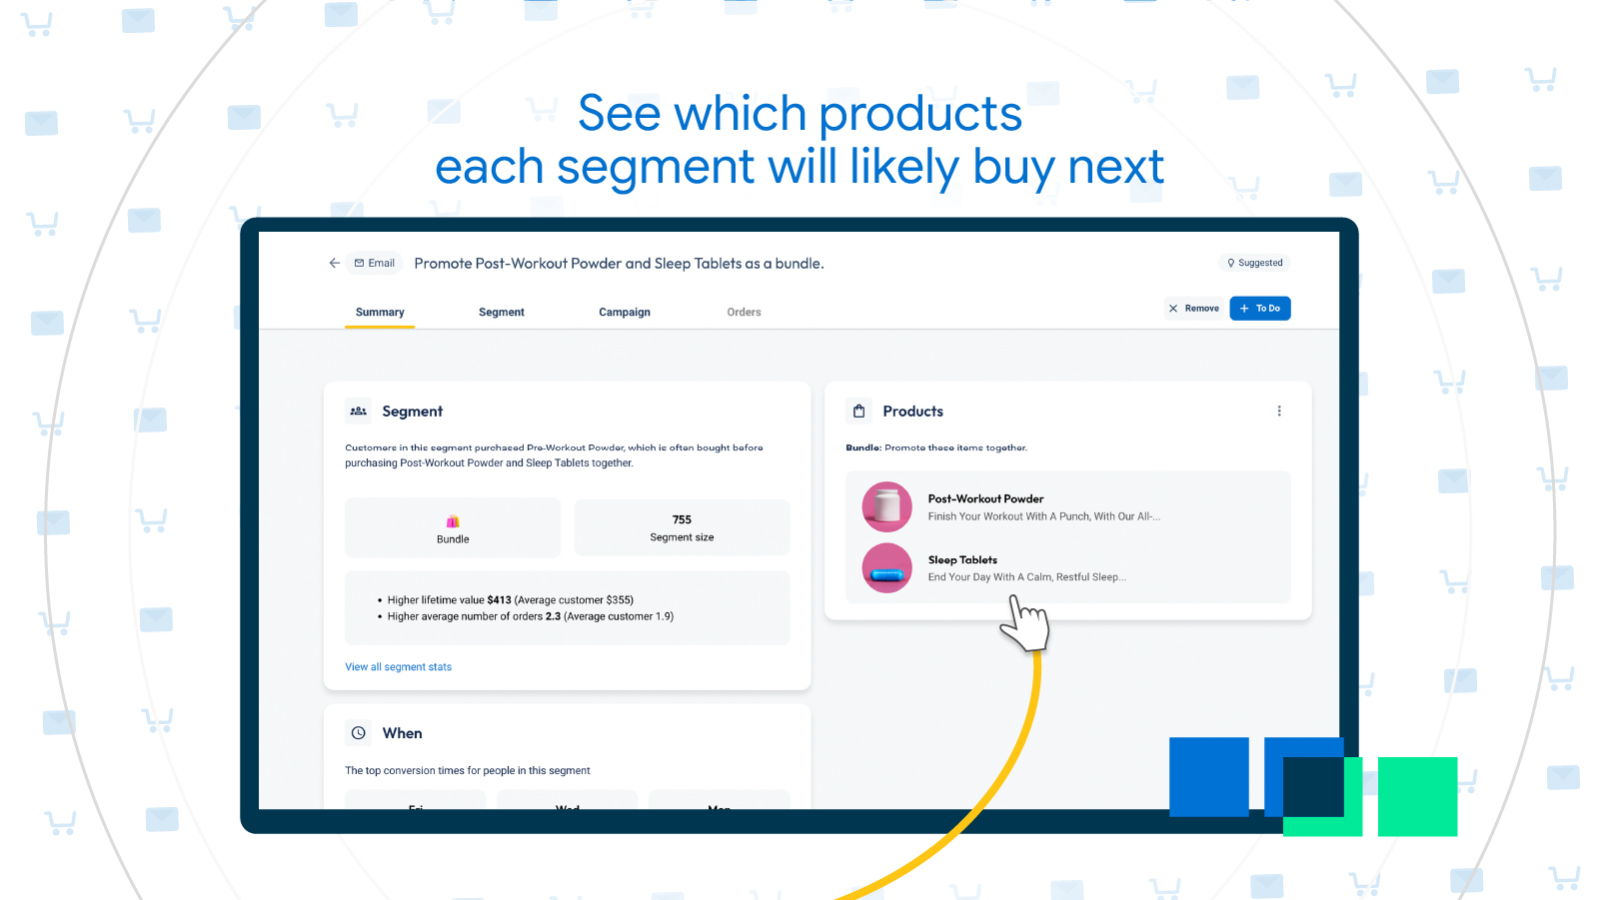 See which products each segment will likely buy next